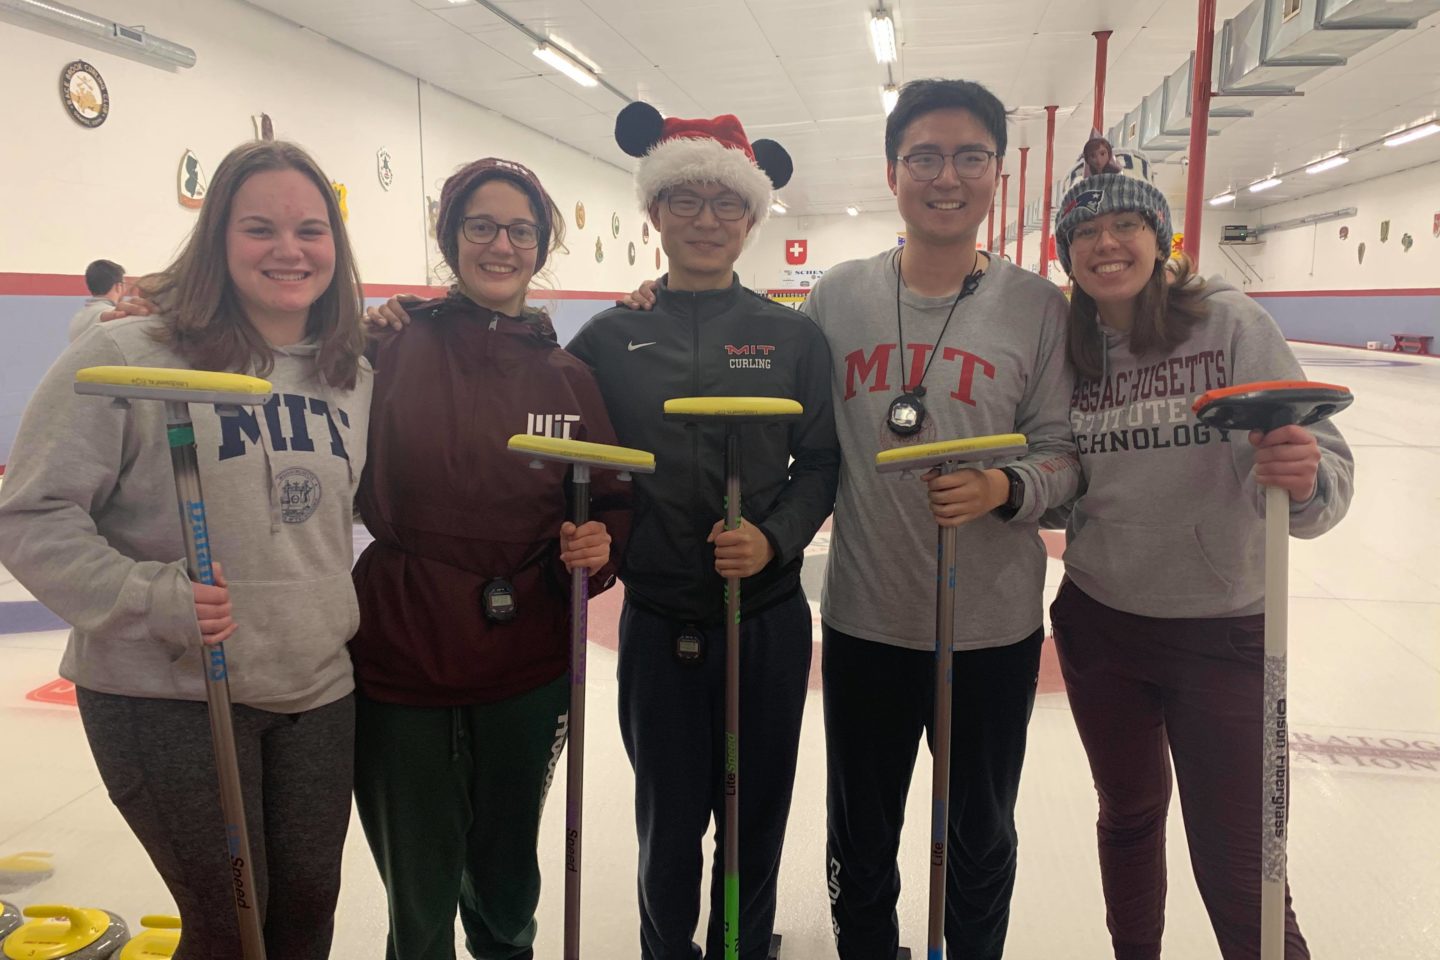 Curling students posing on ice holding brooms